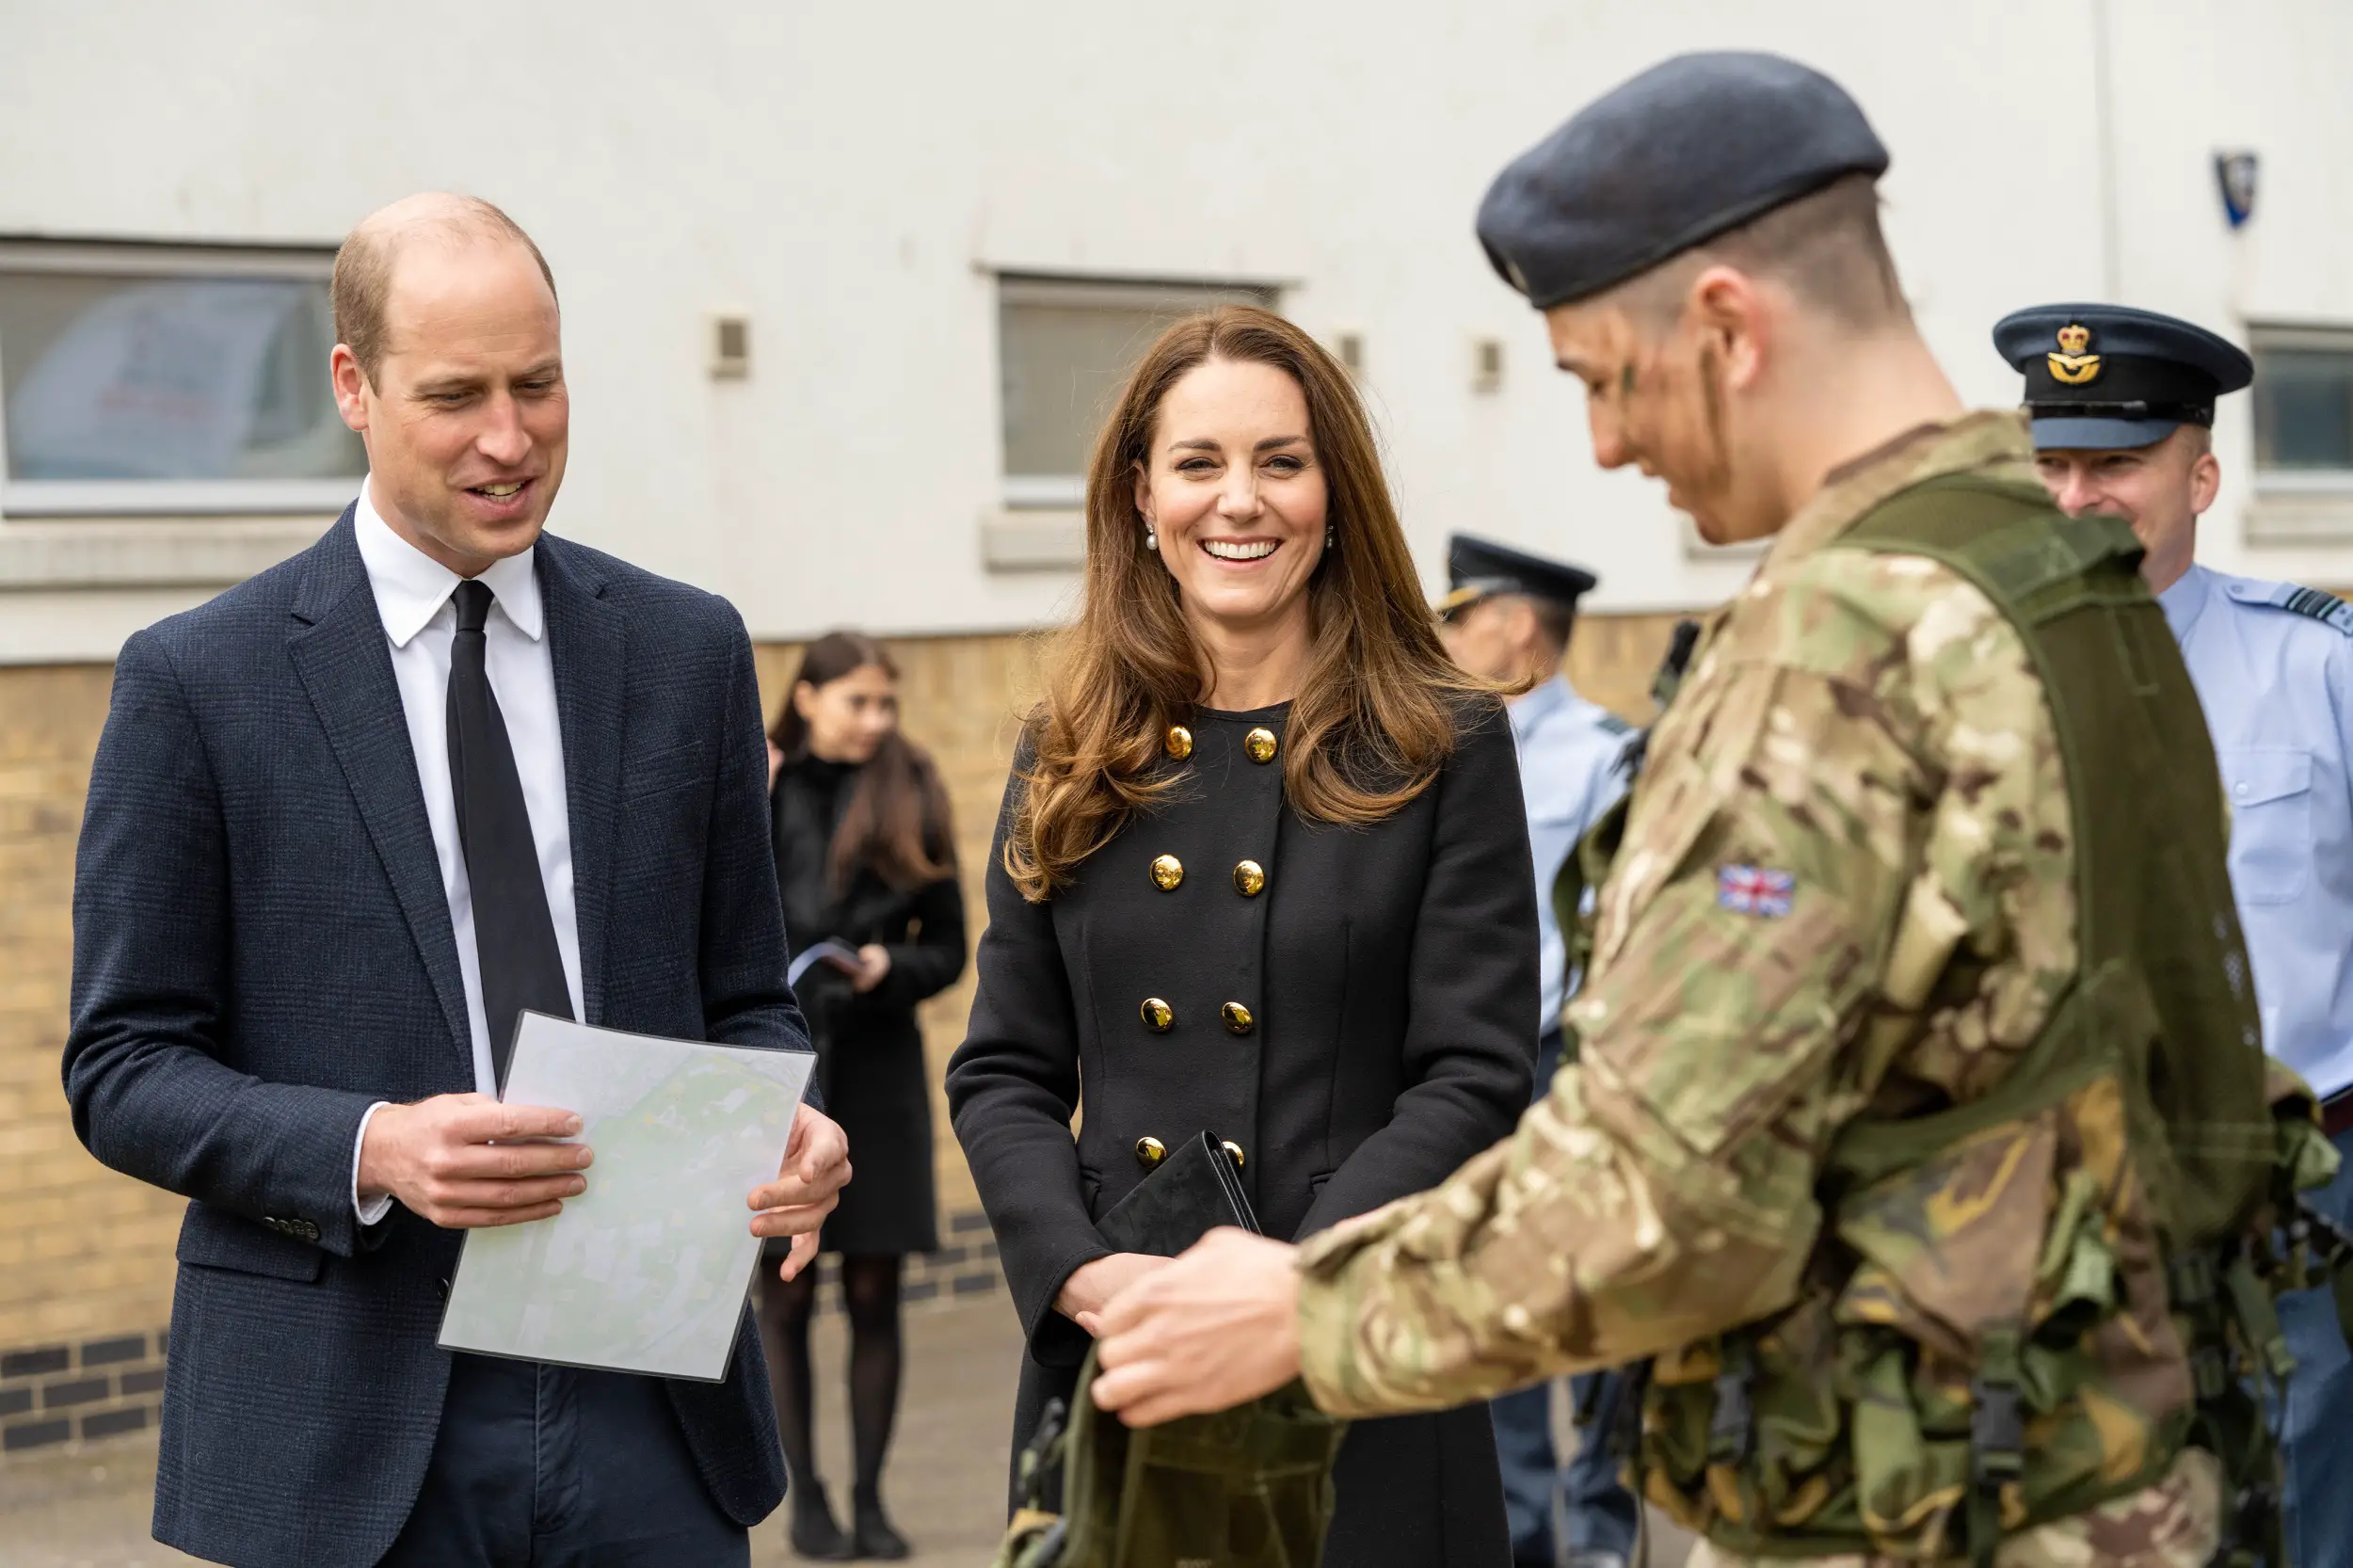 The Duke and Duchess of Cambridge visited Air Cadets to pay tribute to Prince Philip